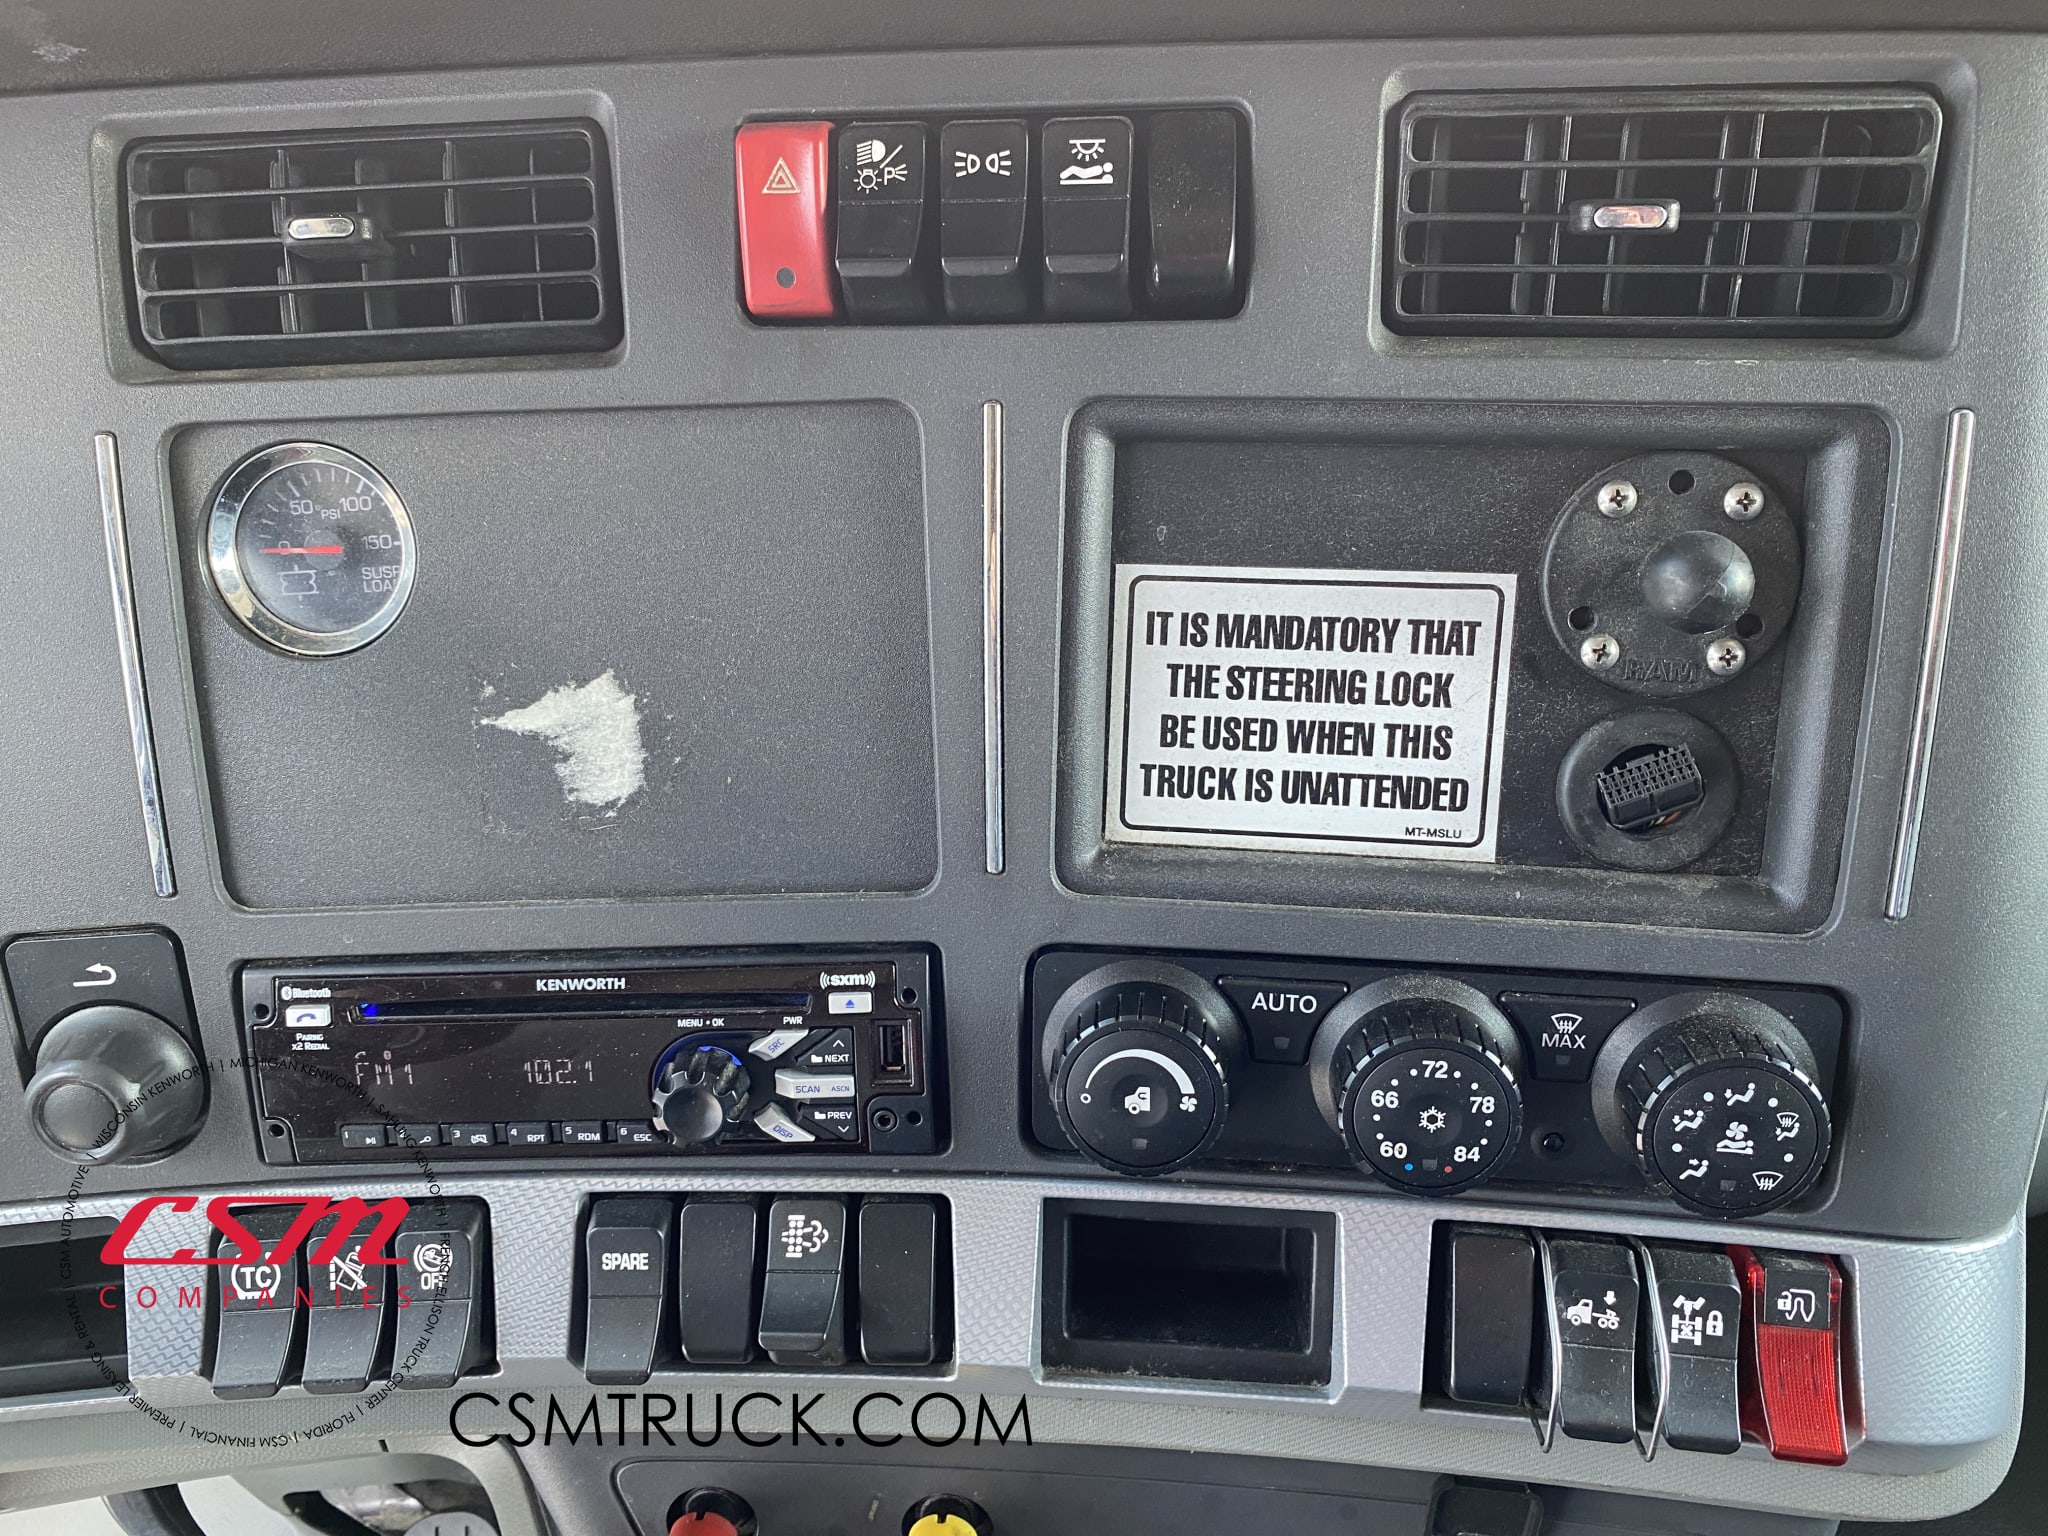 Interior radio and navigation system for this 2020 Kenworth T680 (Stock number: ULJ354515)